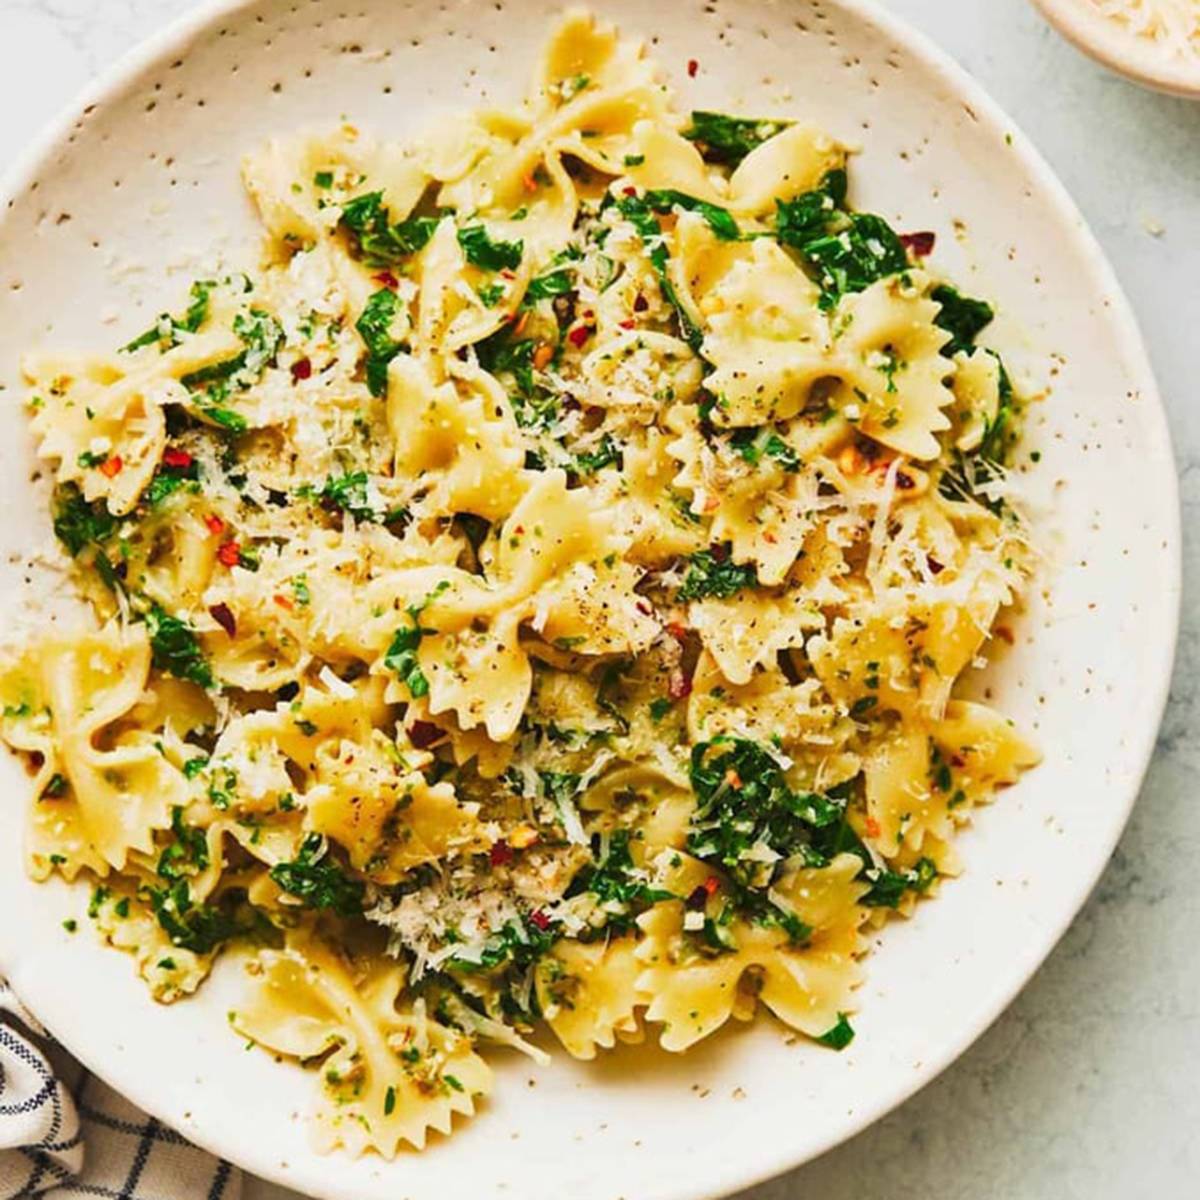 Bowtie pasta in a bowl with kale and cheese.